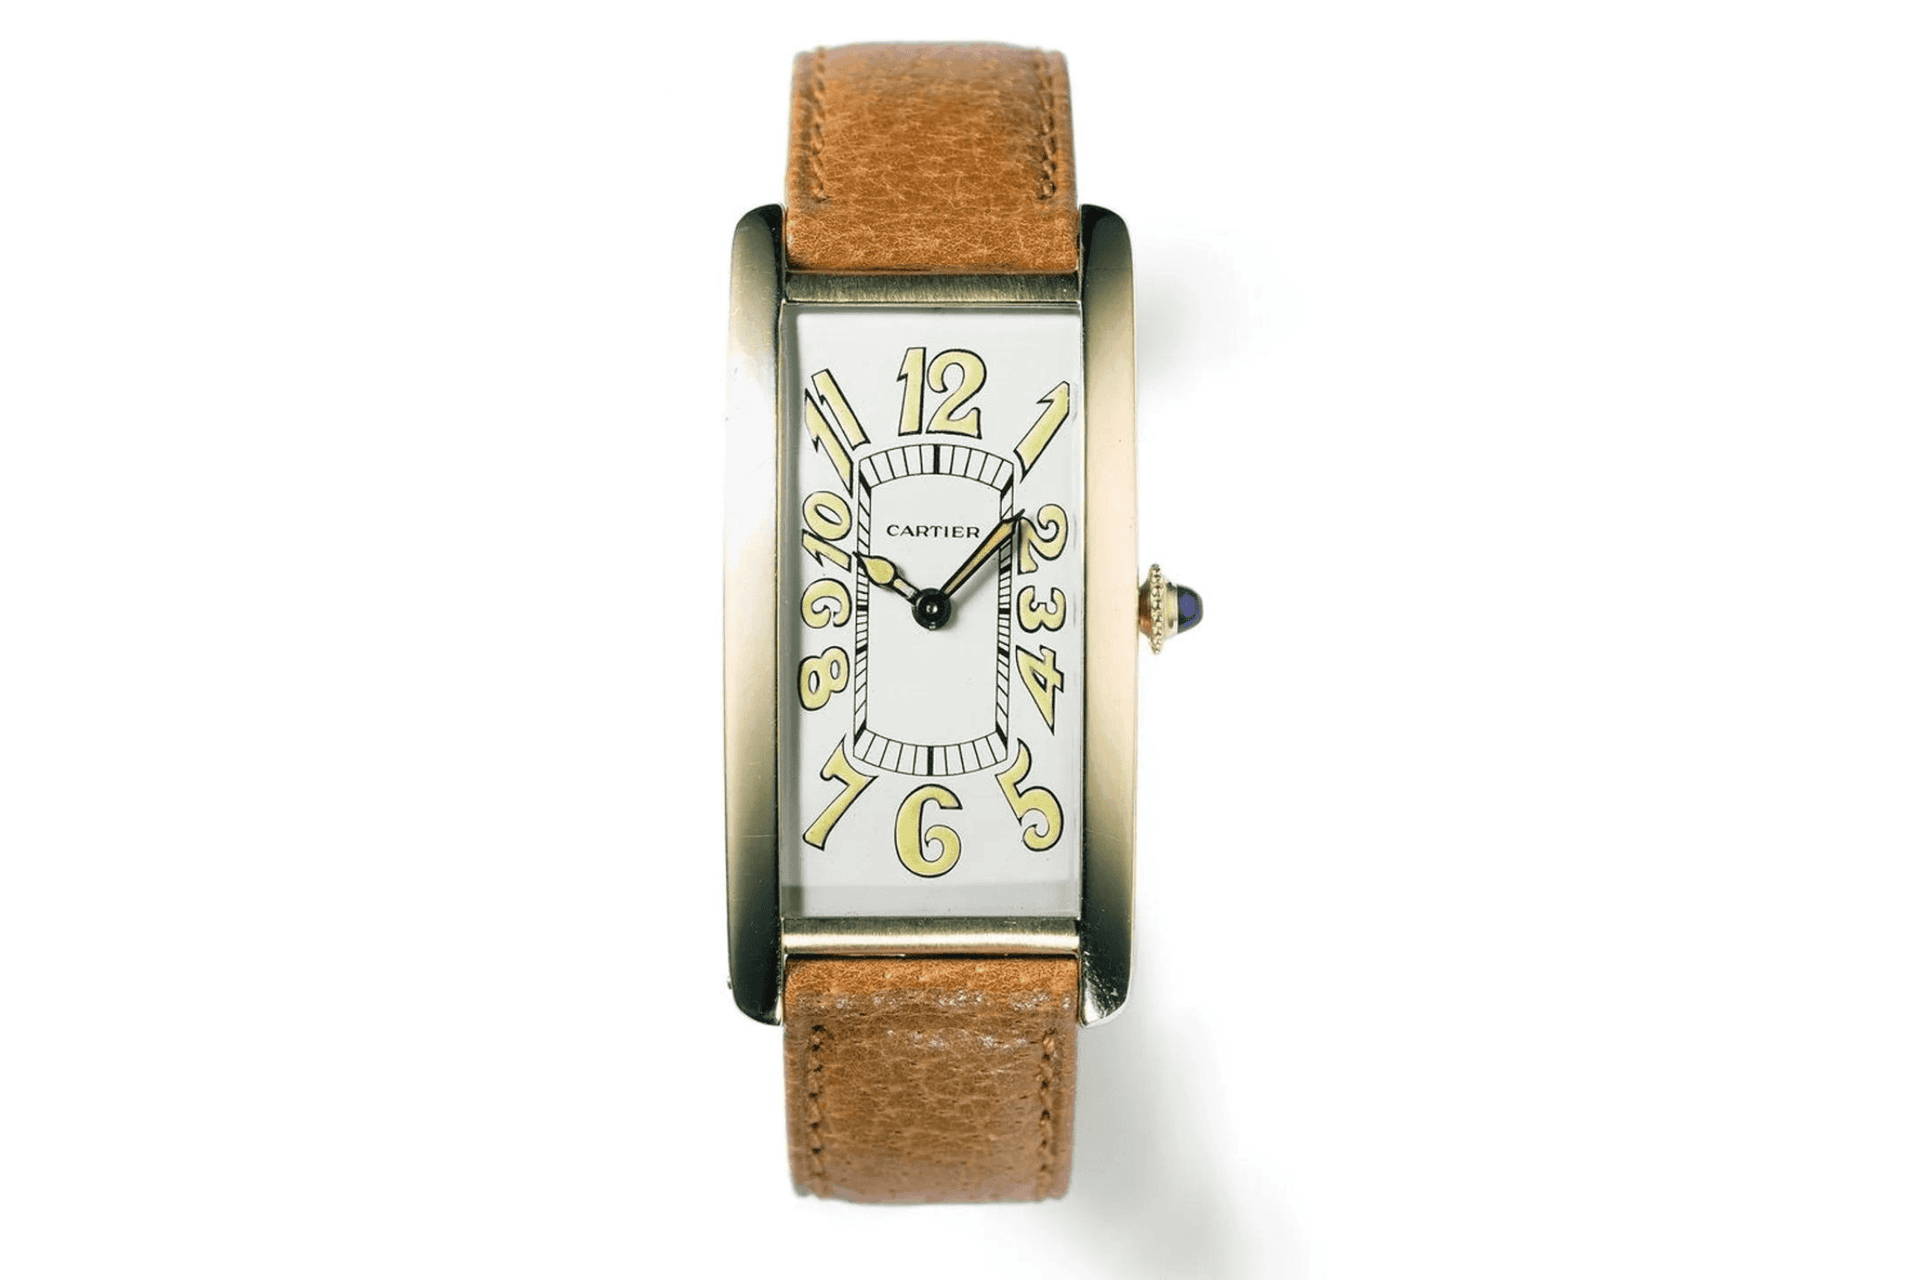 The Tank Cintrée watch, which was gifted by Fred Astaire to 'Felix'